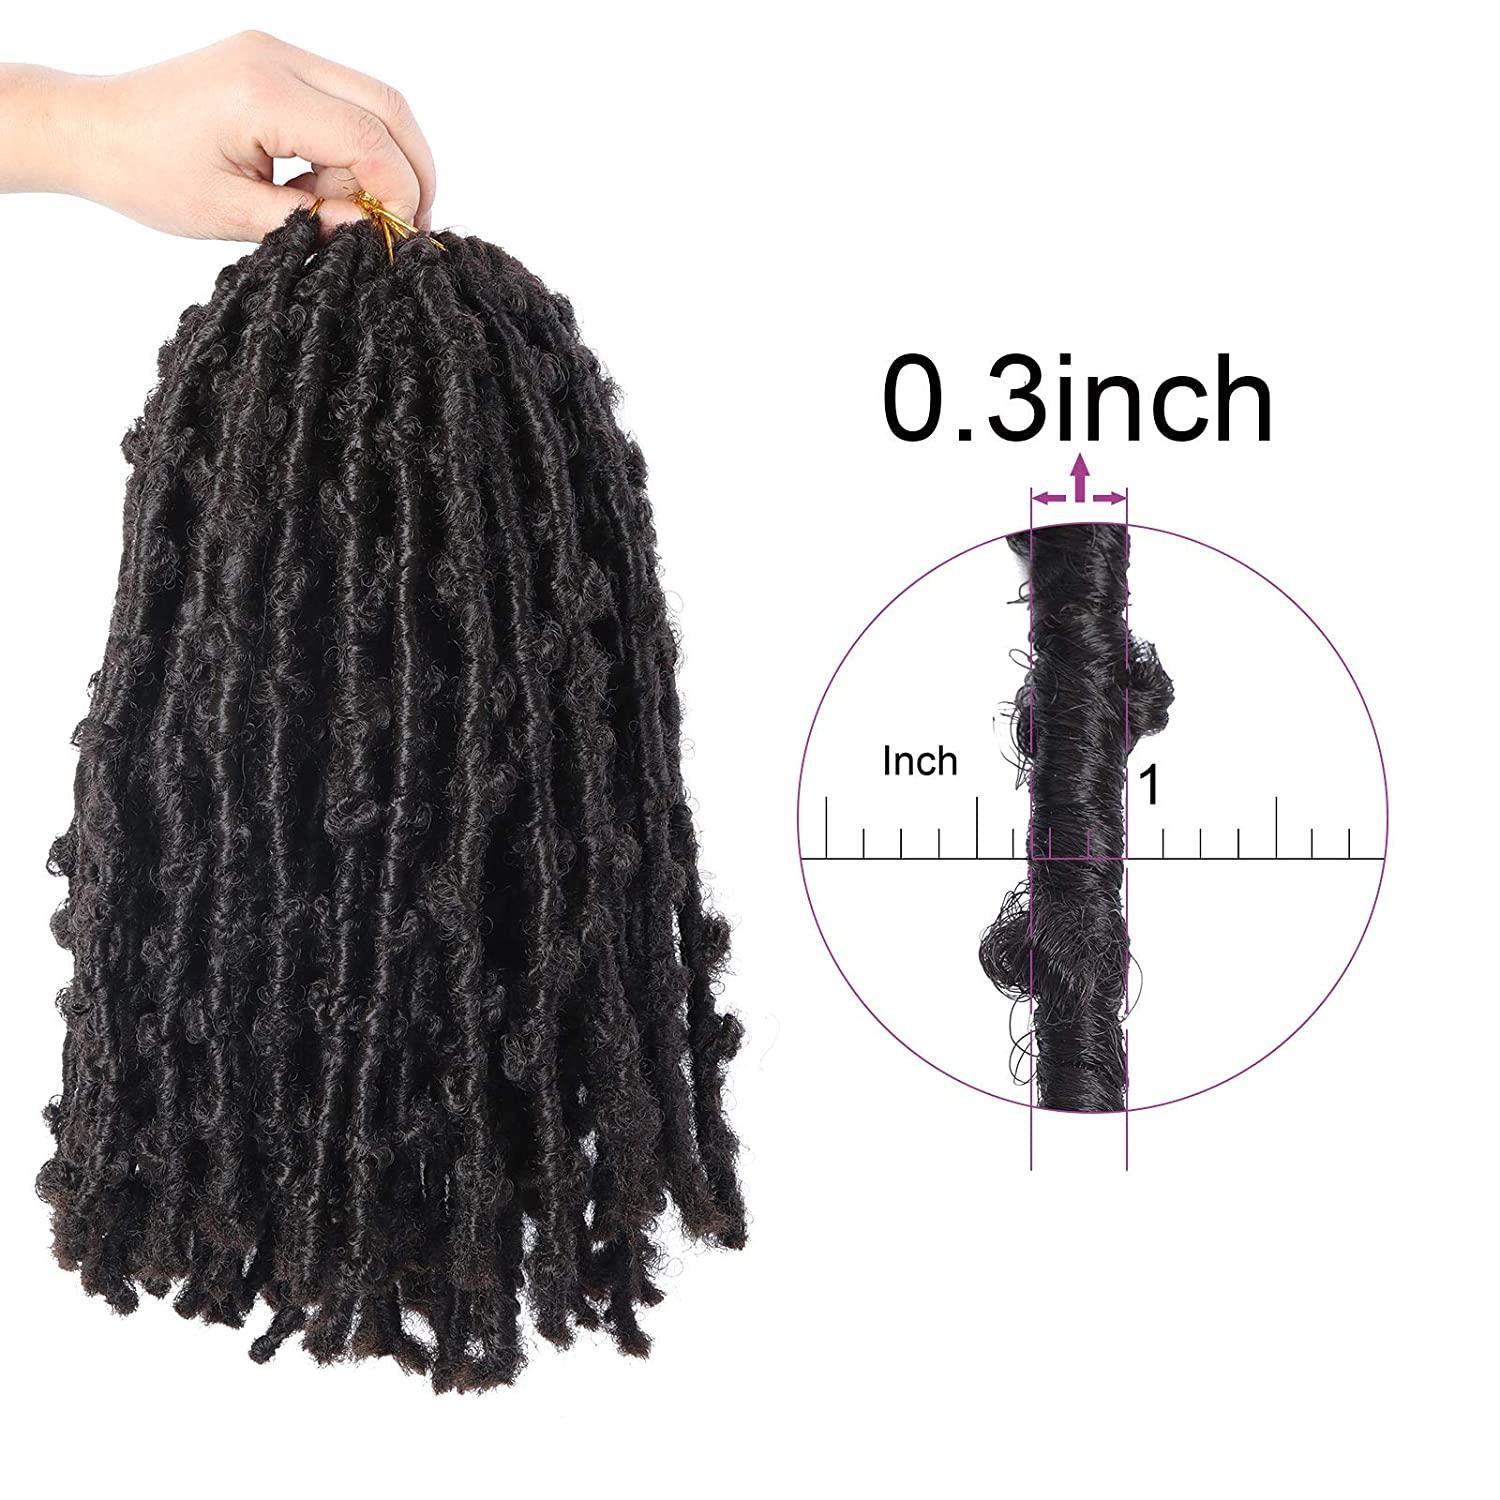 6 Pack Butterfly Locs Hair 14 Inch Pre Looped Distressed Butterfly Locs Crochet  Hair Short Soft Butterfly Locs Crochet Braid Hair Extensions(#4) 14 Inch  (Pack of 6) #4